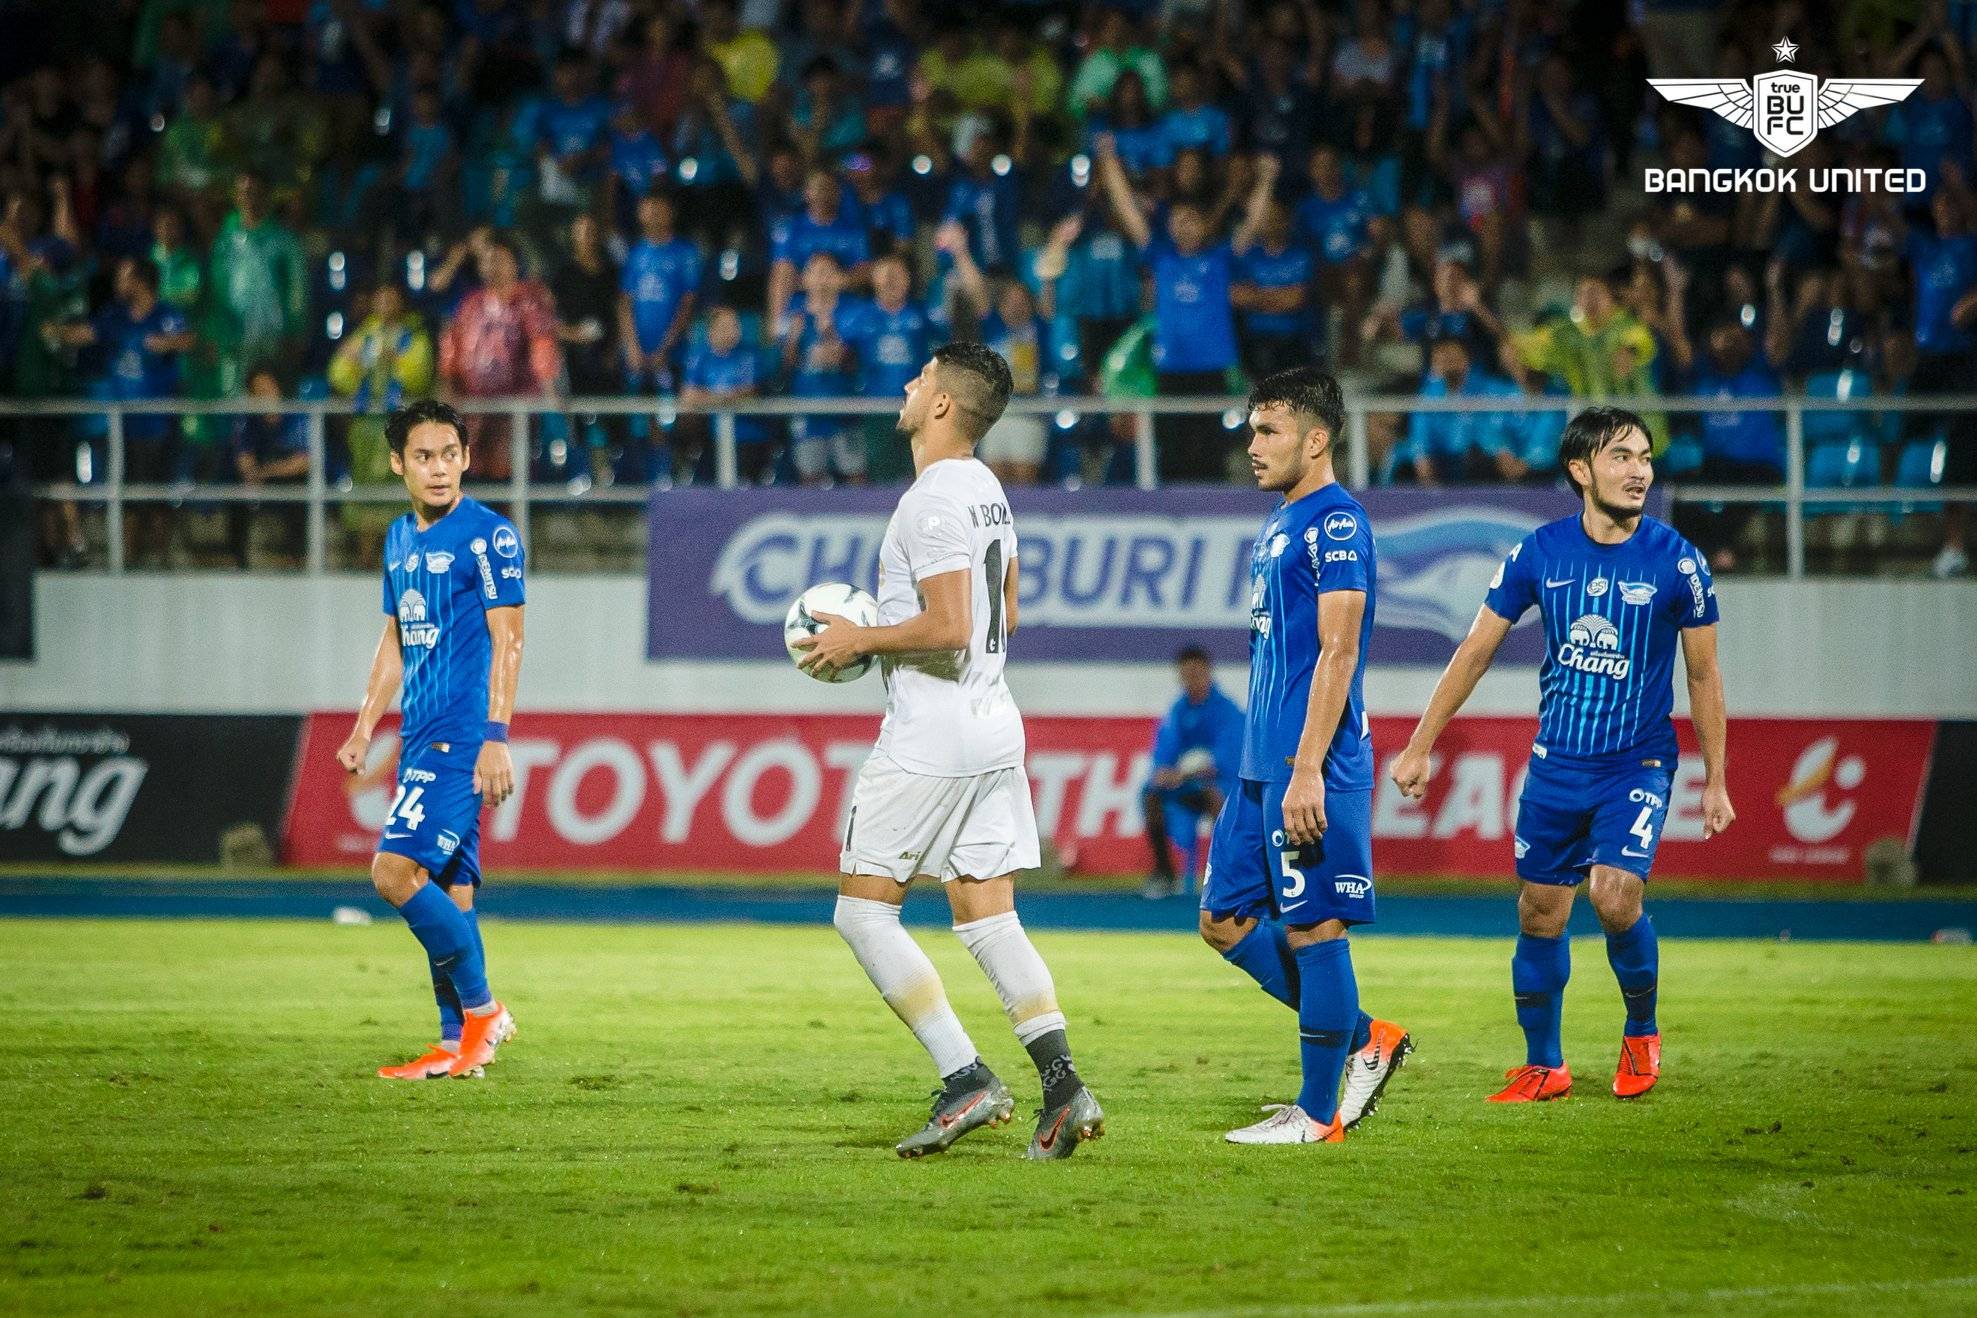 Pressure Mounts on Chasing Pack in Thai League Title Race